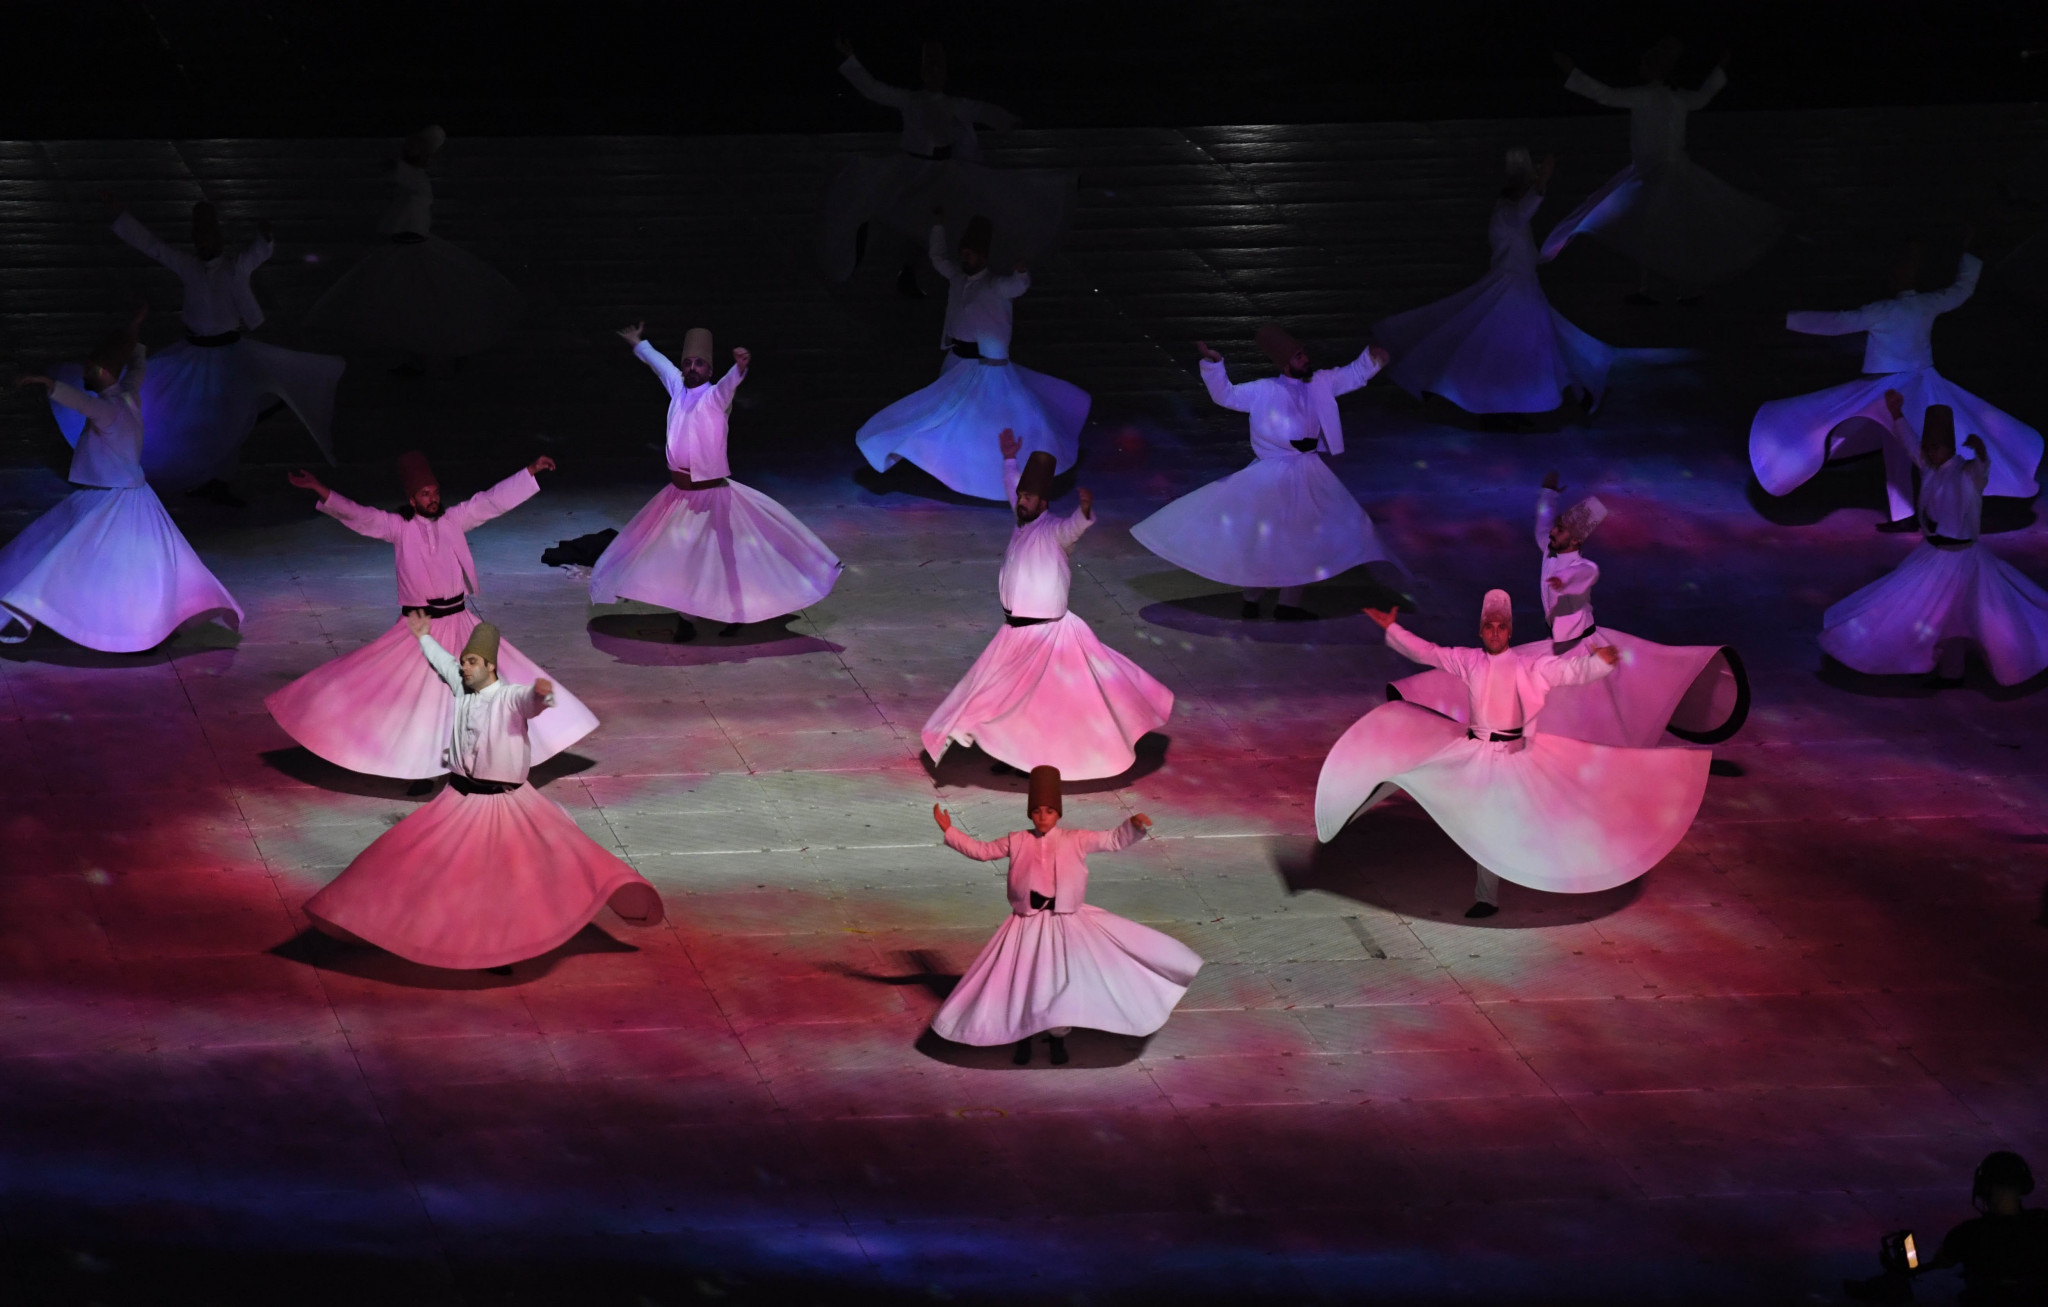 Whirling Dervishes produced a superb performance to cap a magical night in Konya ©Konya 2021